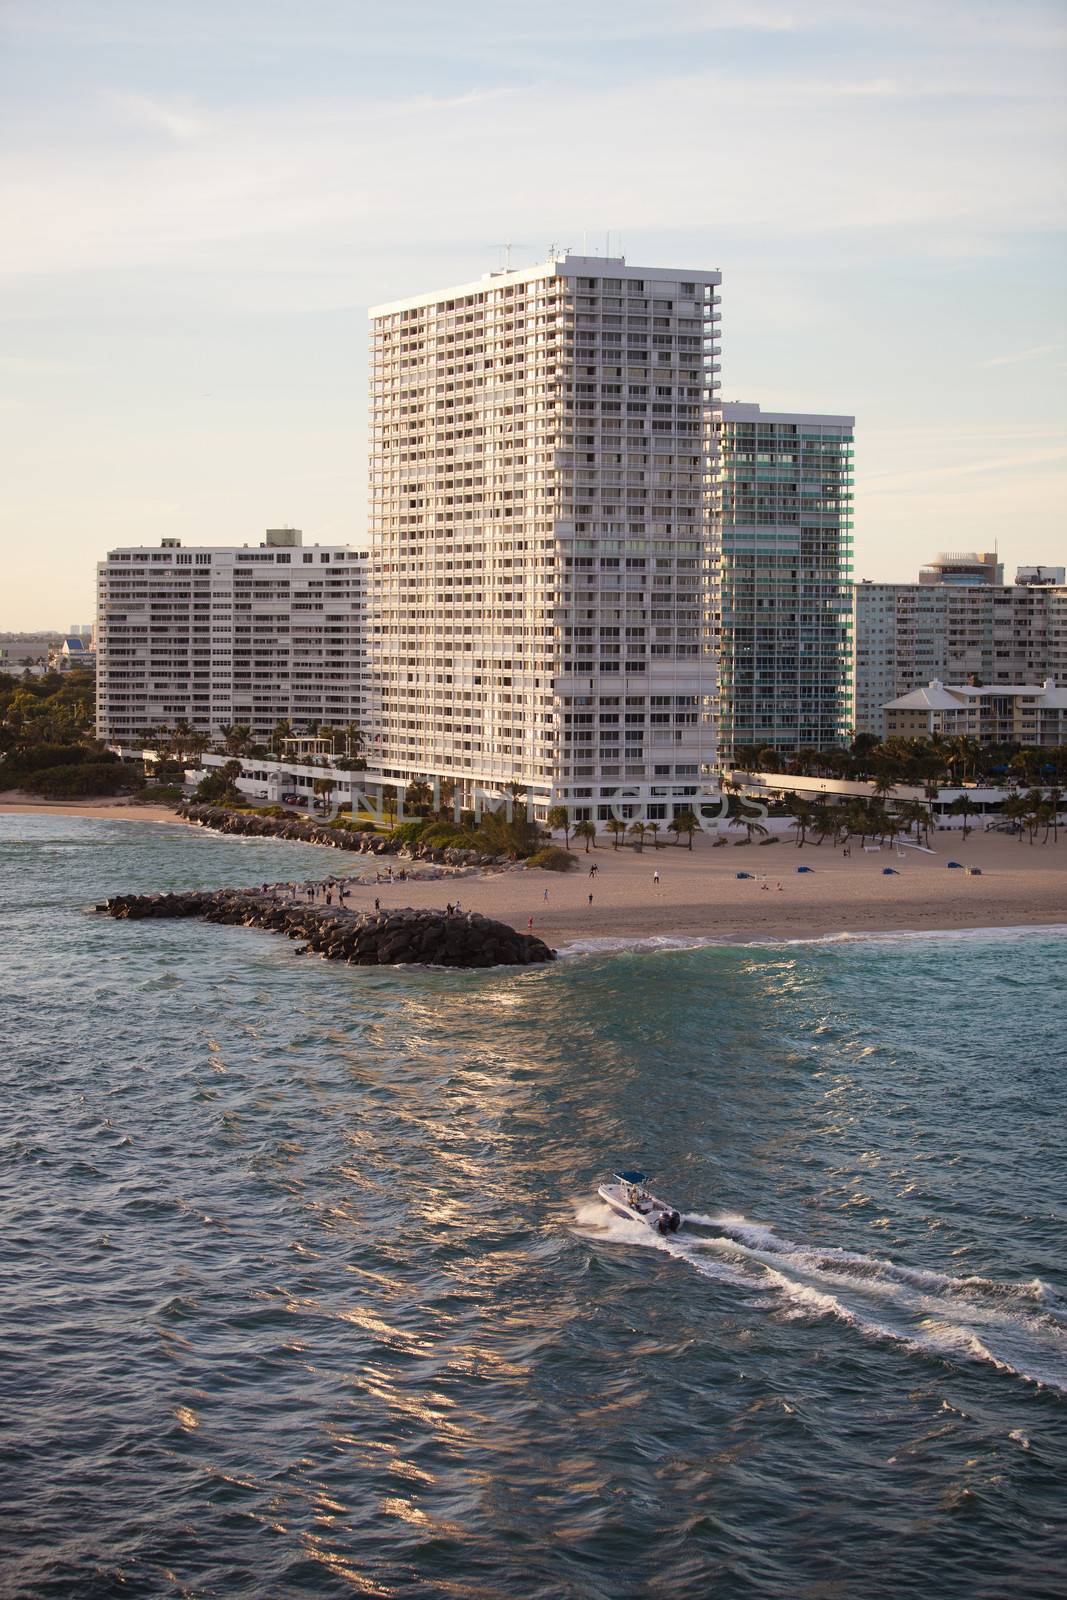 High End Condominium and Apartment Buildings in Fort Lauderdale by Creatista